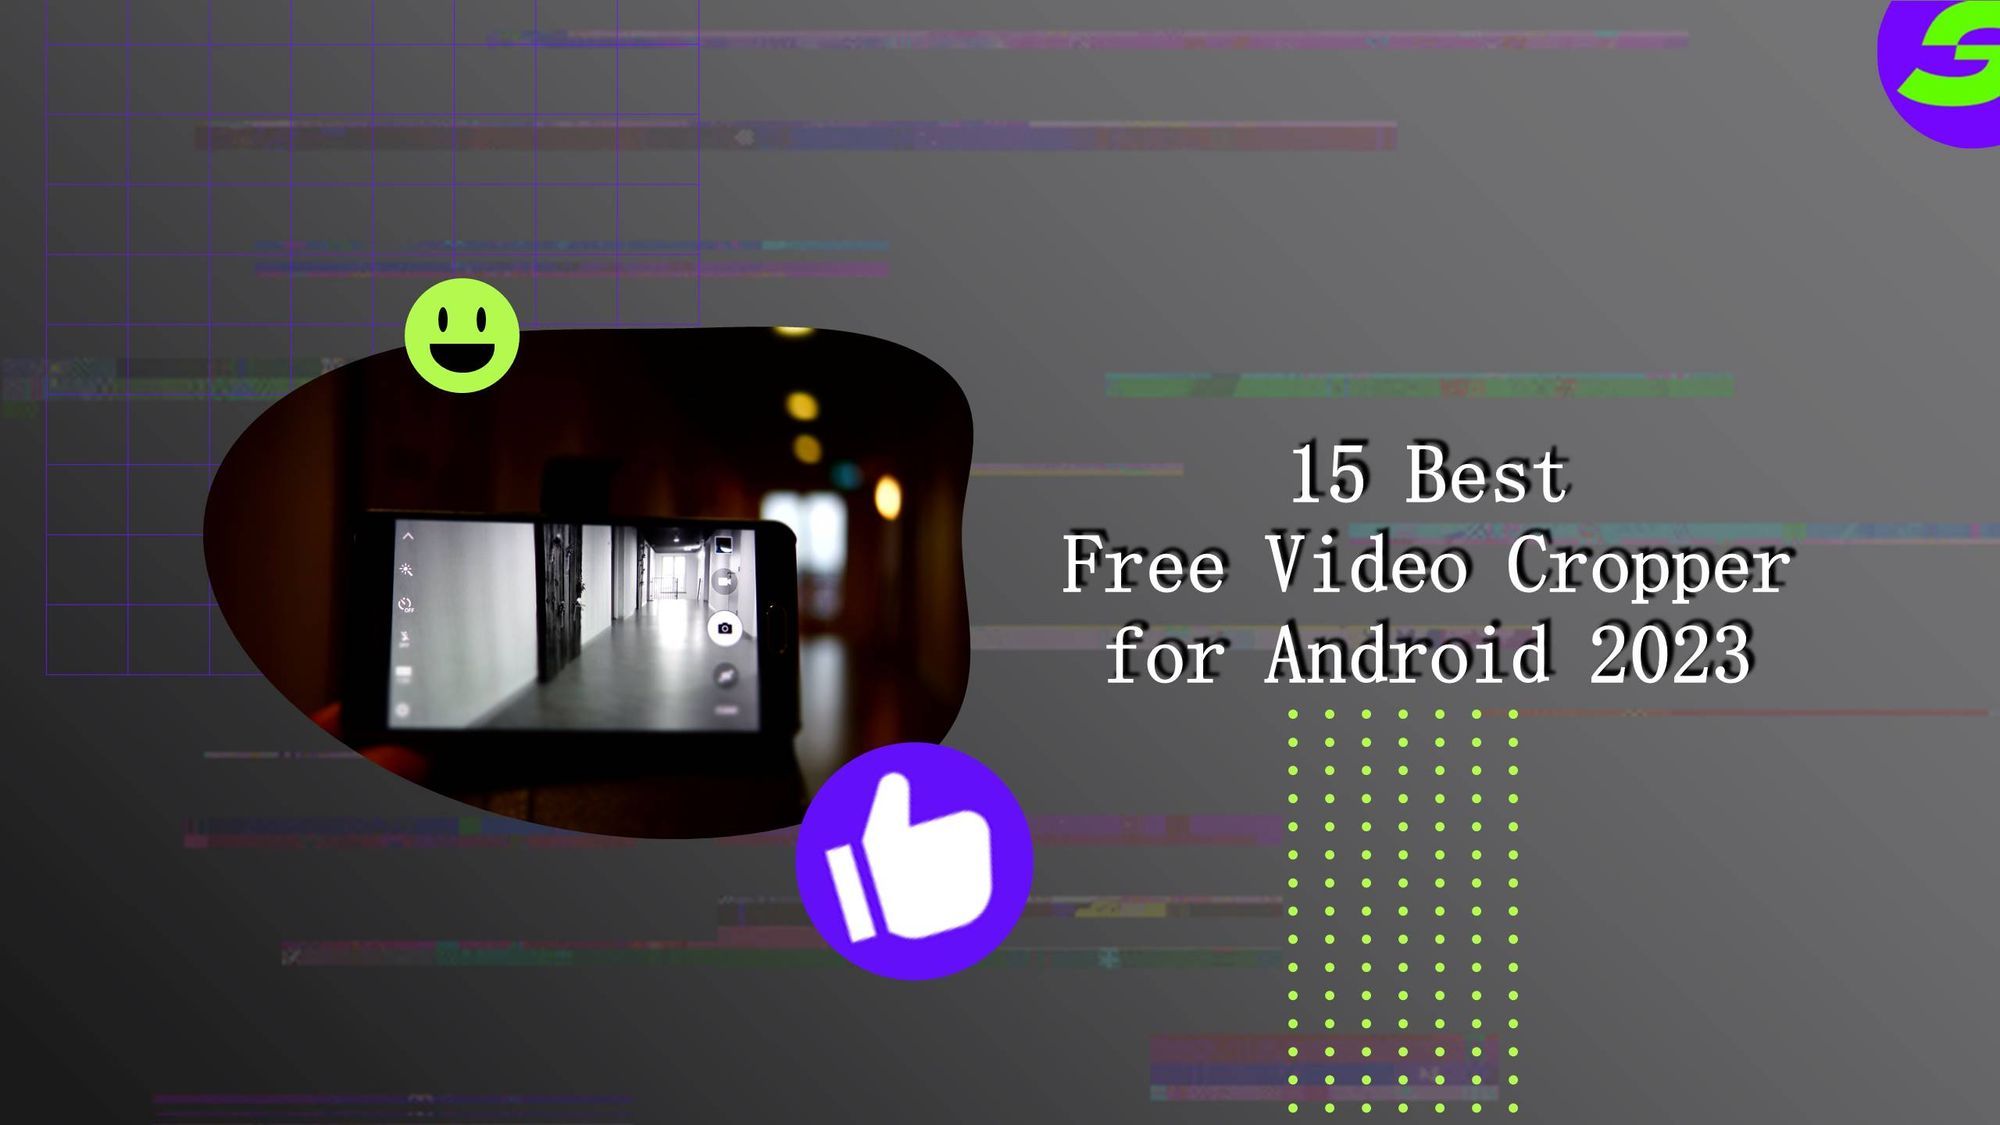 Top Free Video Cropper for Android 2023